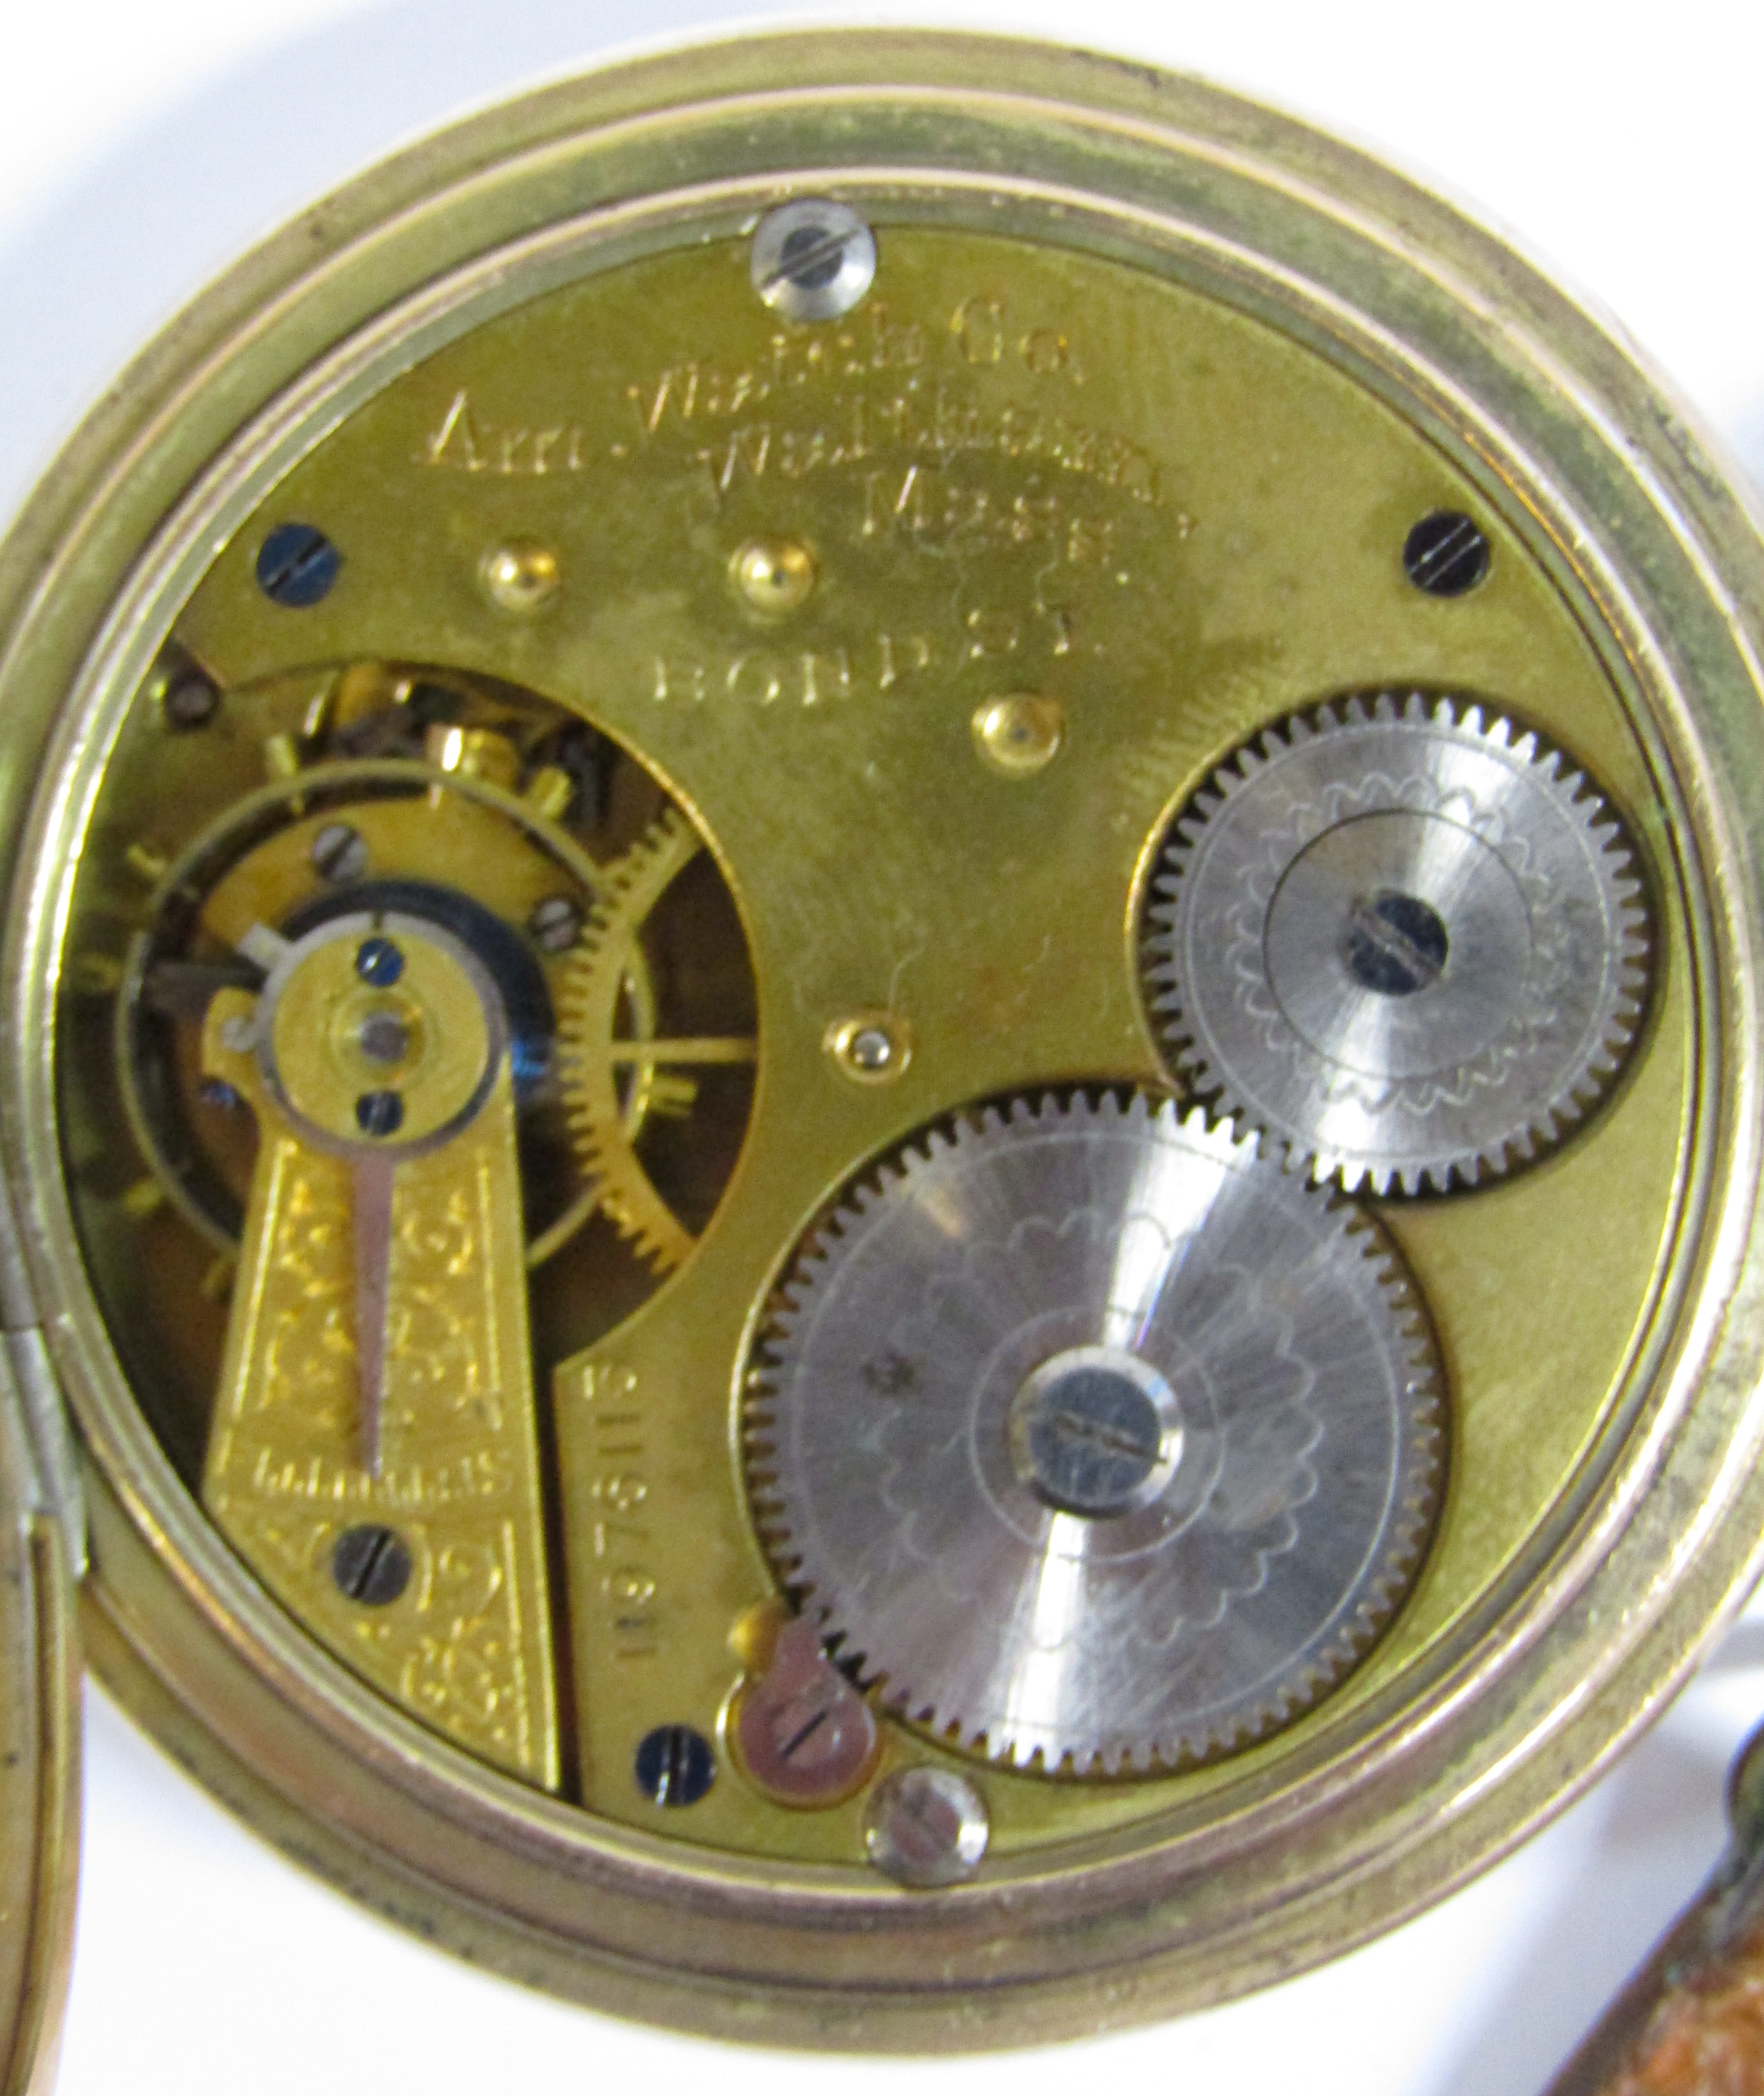 3 pocket watches - A.W.W. Co Waltham Mass gold plated, Thomas Russell & Son Liverpool gold plated - Image 5 of 18